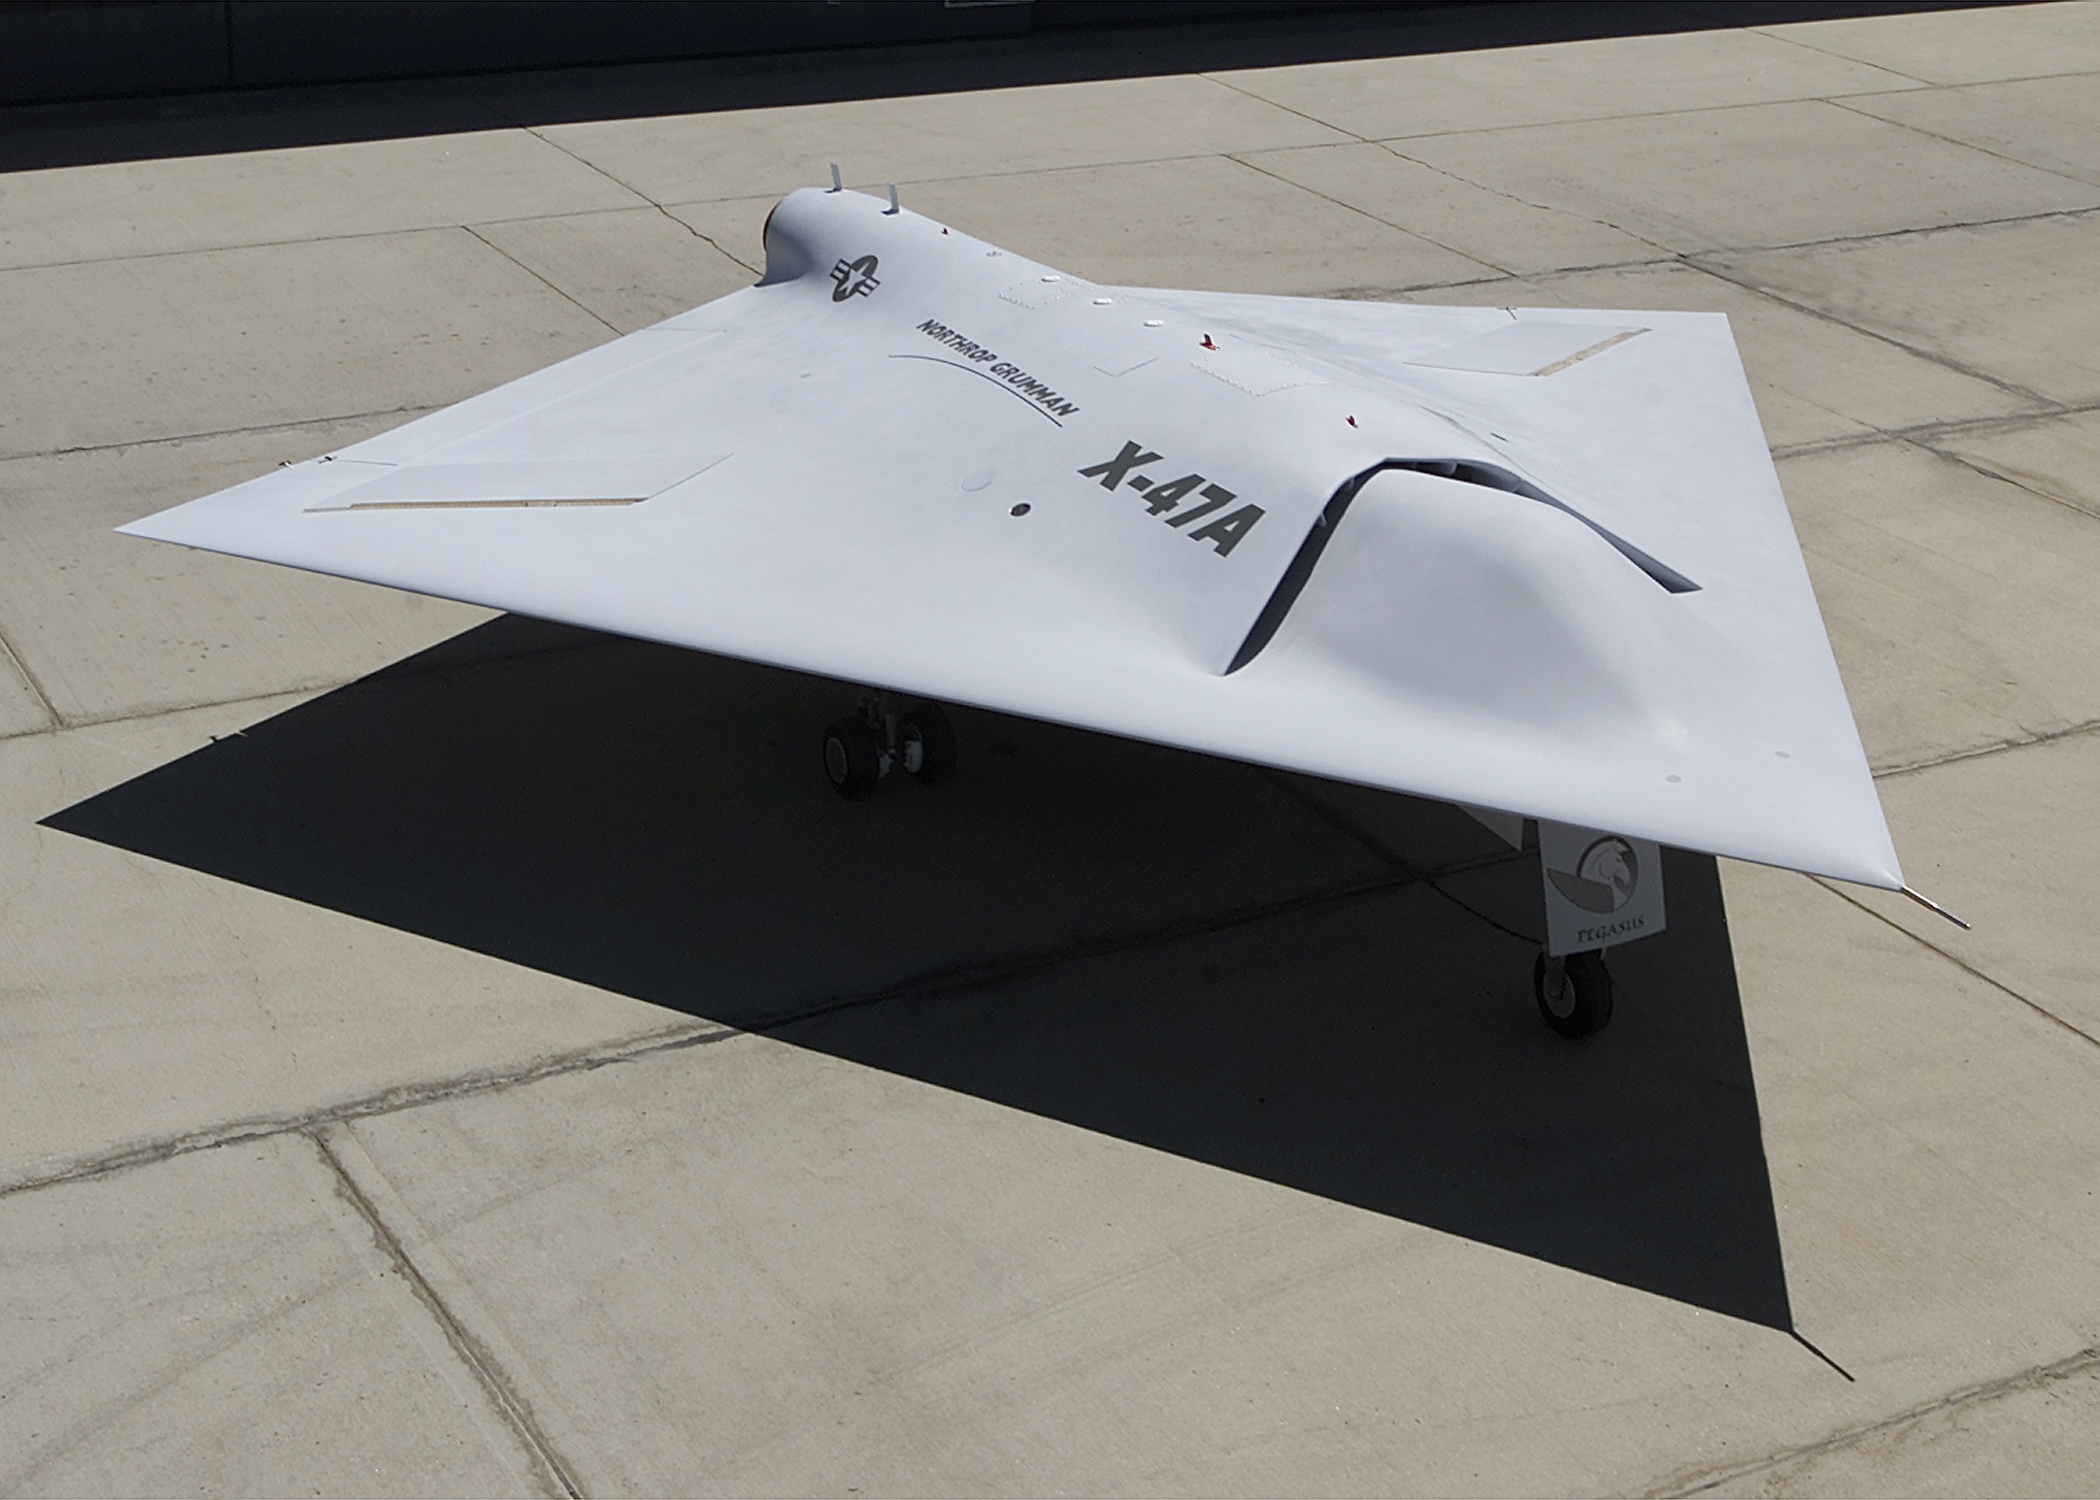 X-47A rollout